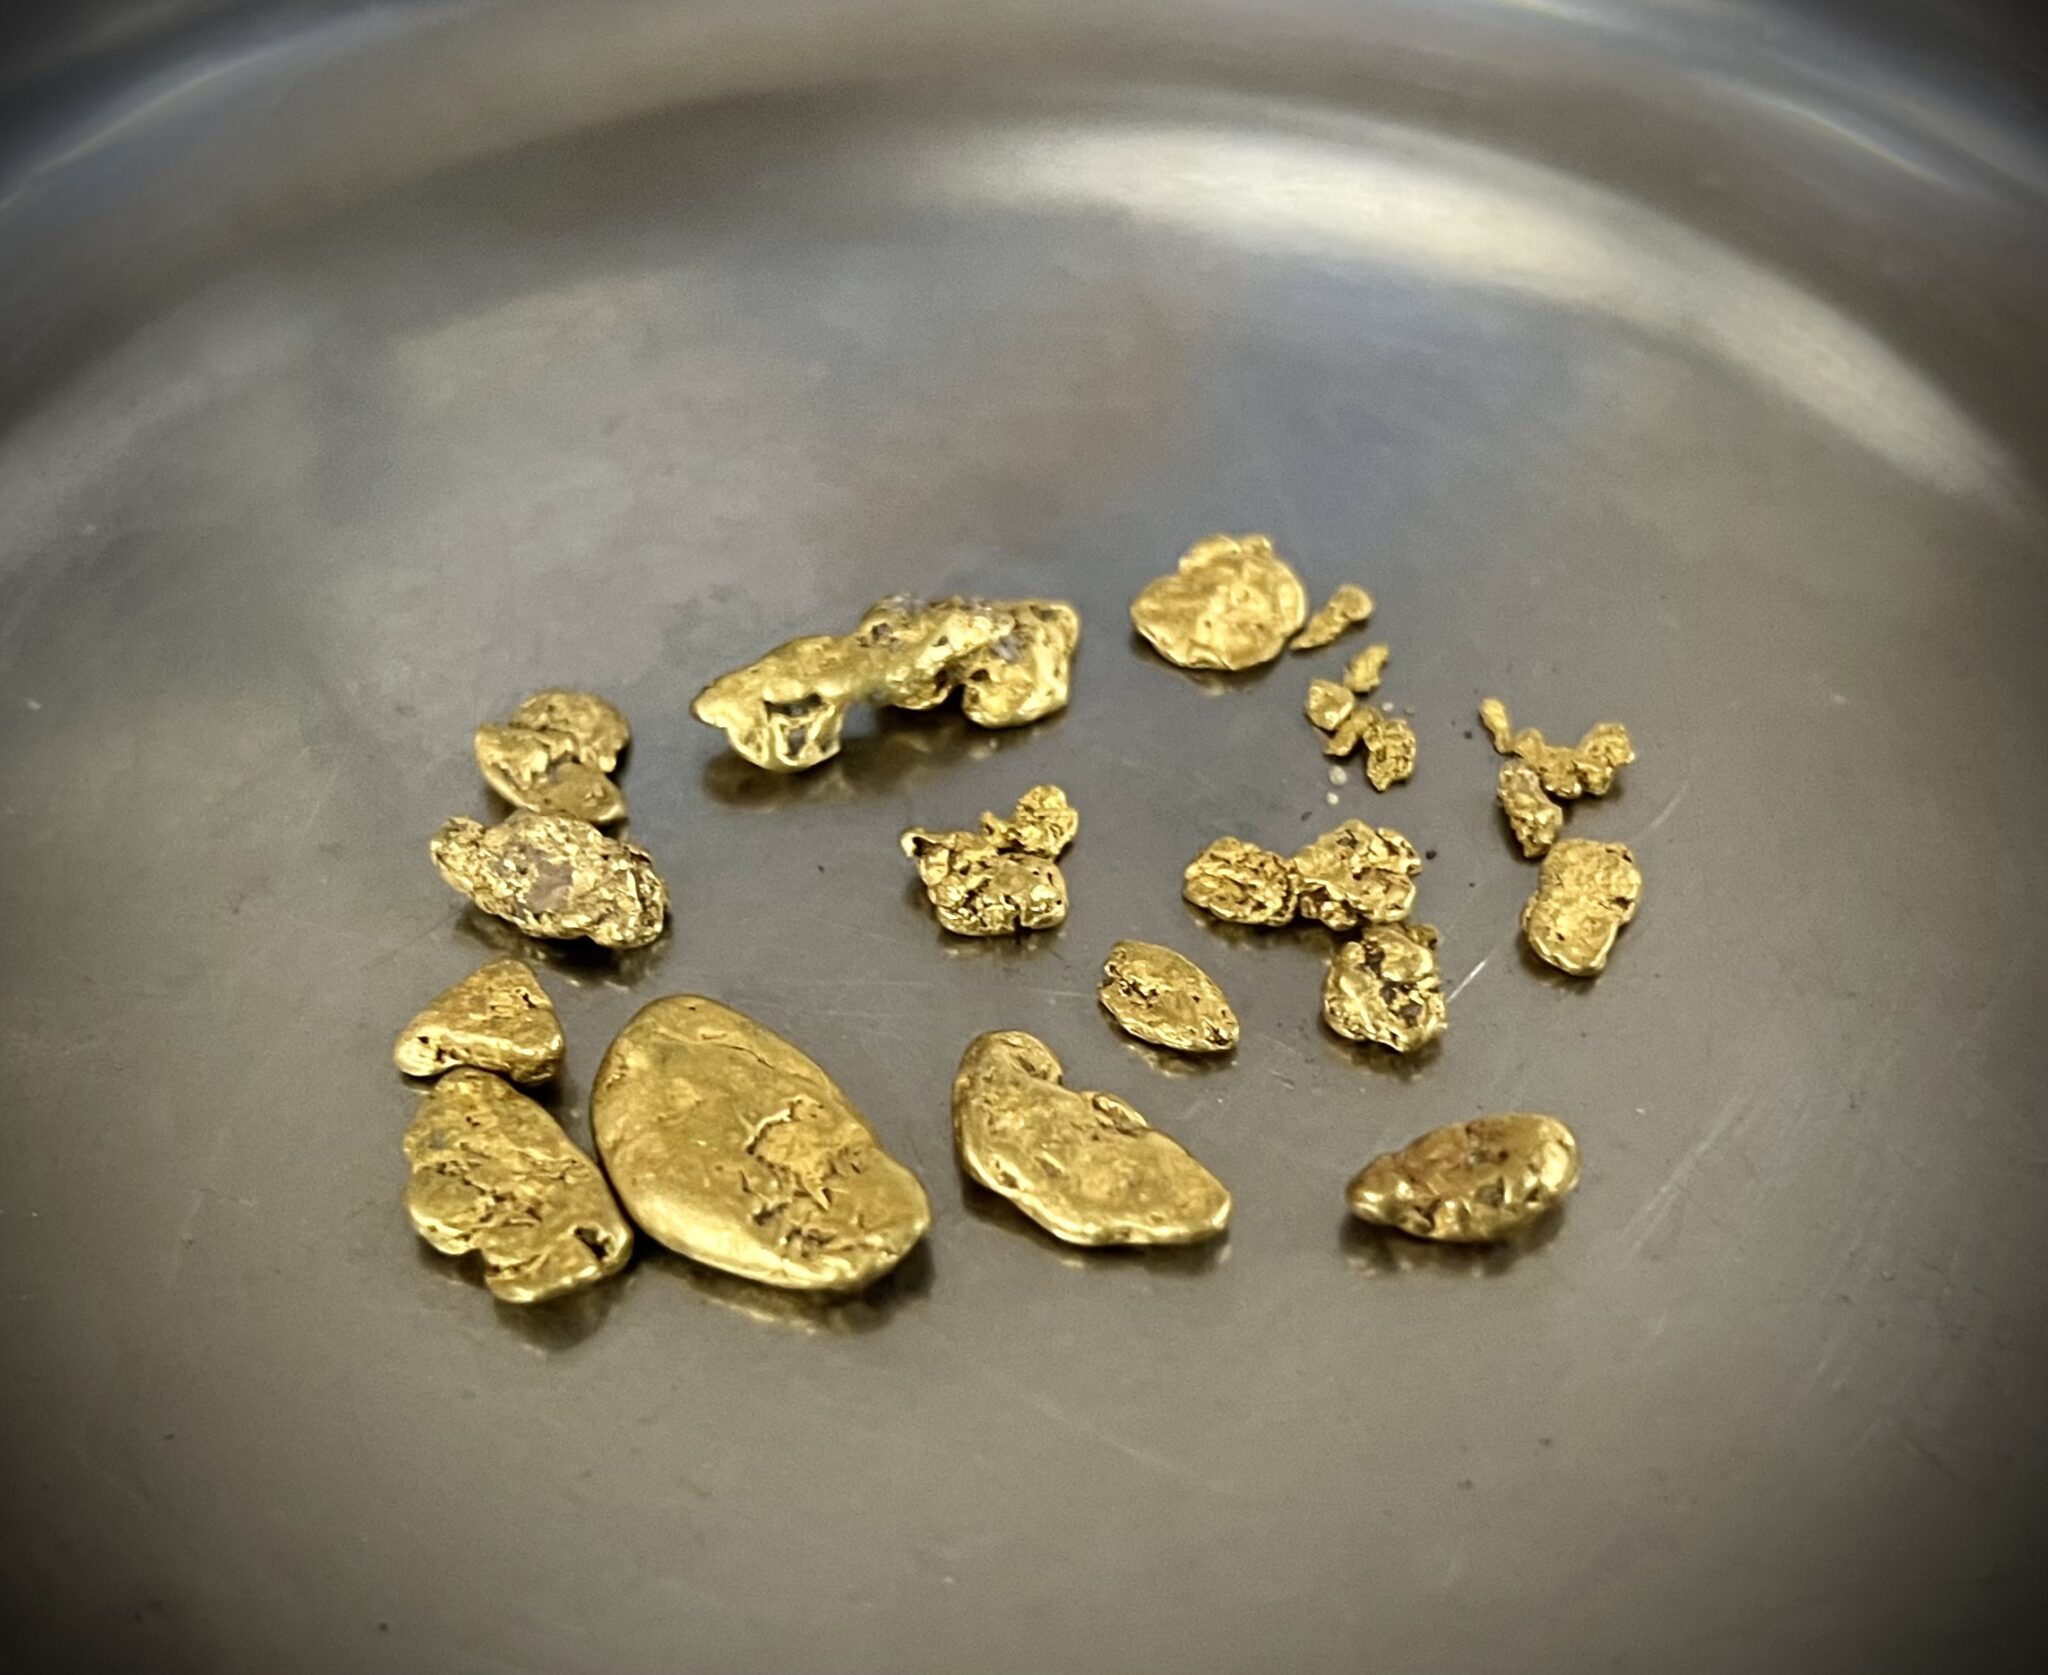 Small gold ingots scattered across an iron pan.